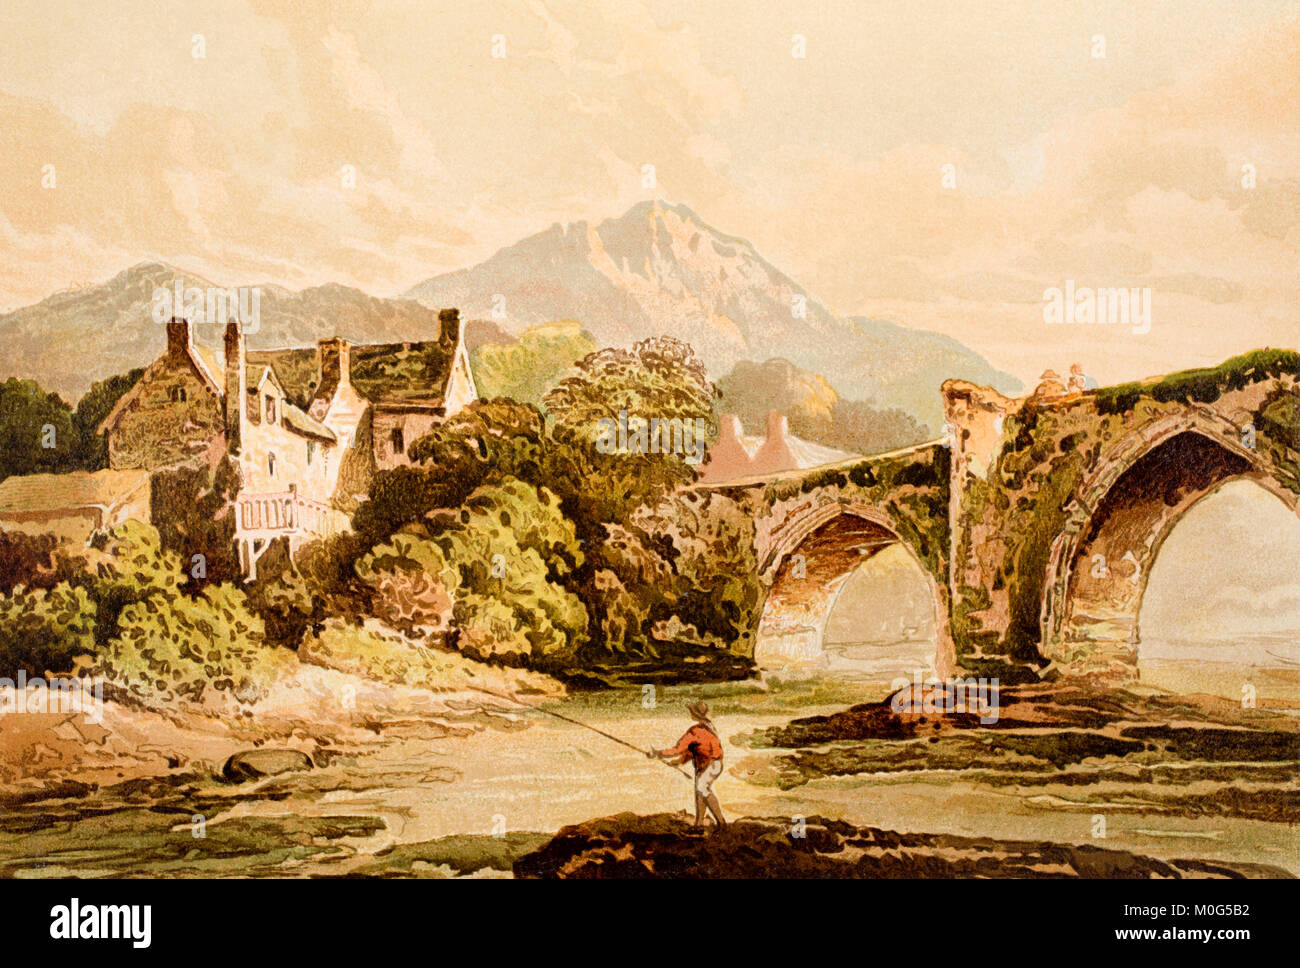 Llanberis, watercolour sketch by Thomas Girtin colour illustration from 1888 The Art of Sketching from nature by Philip H Delamotte Stock Photo